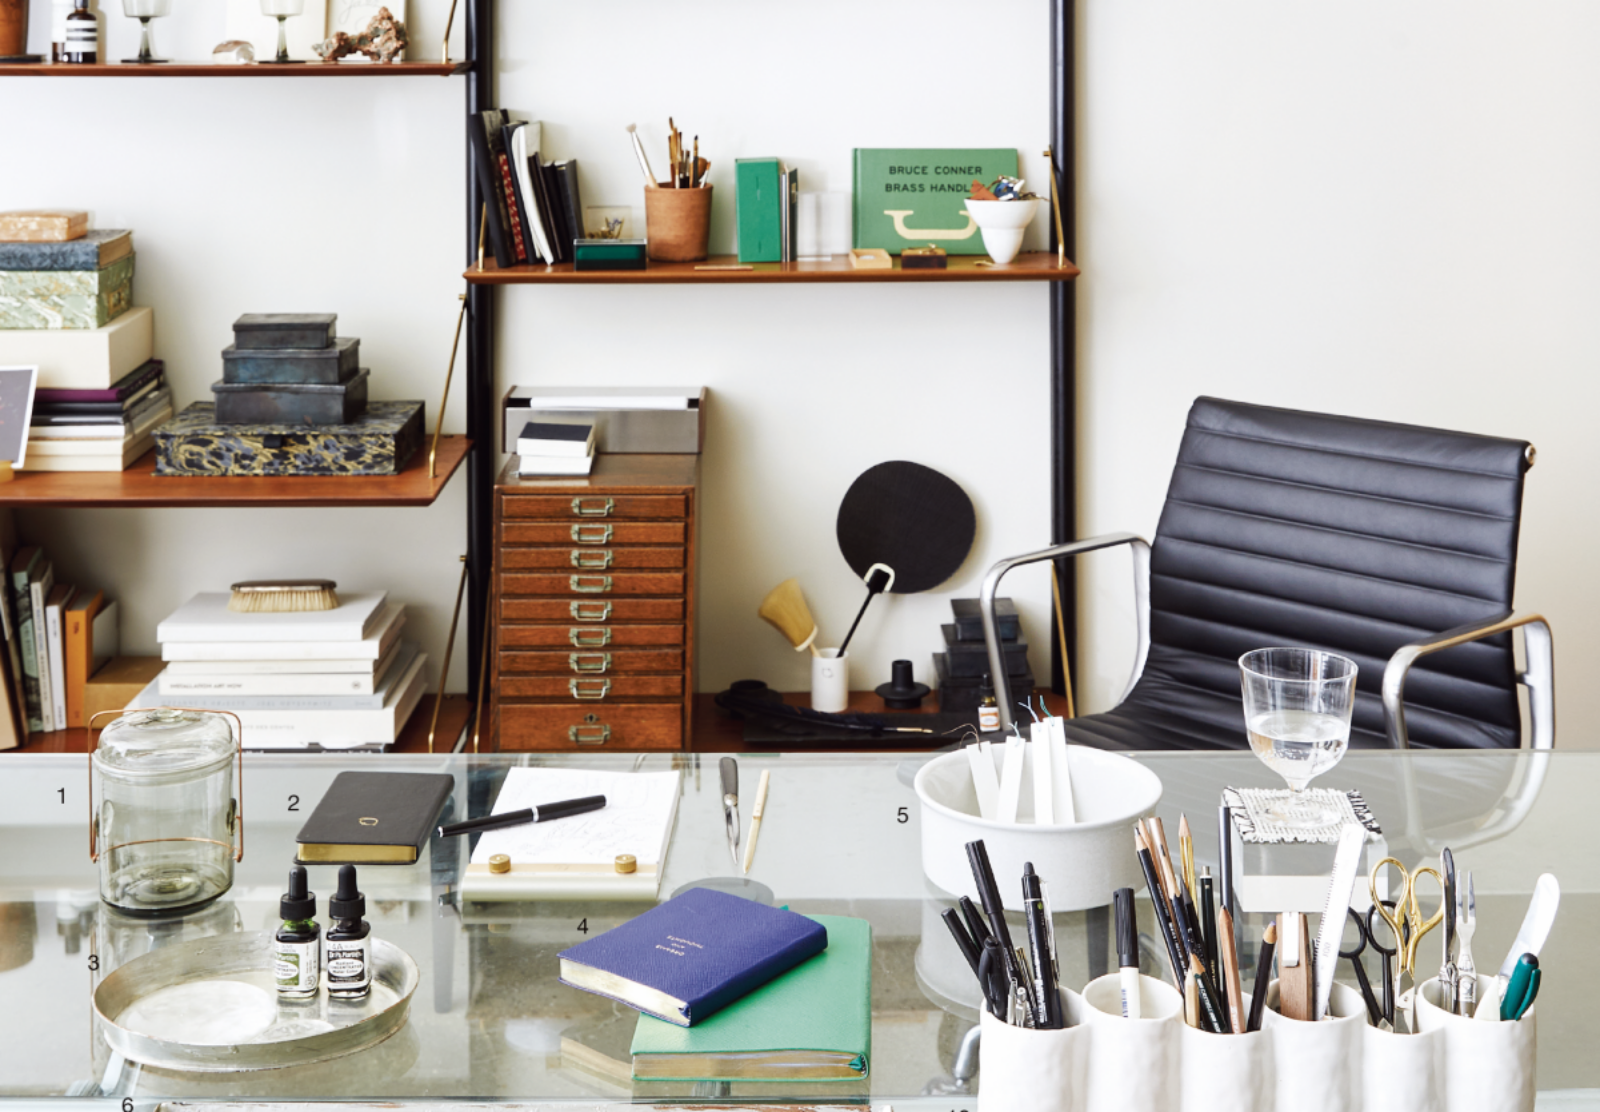 Maison marie claireㅣWhat&#039;s on your desk?